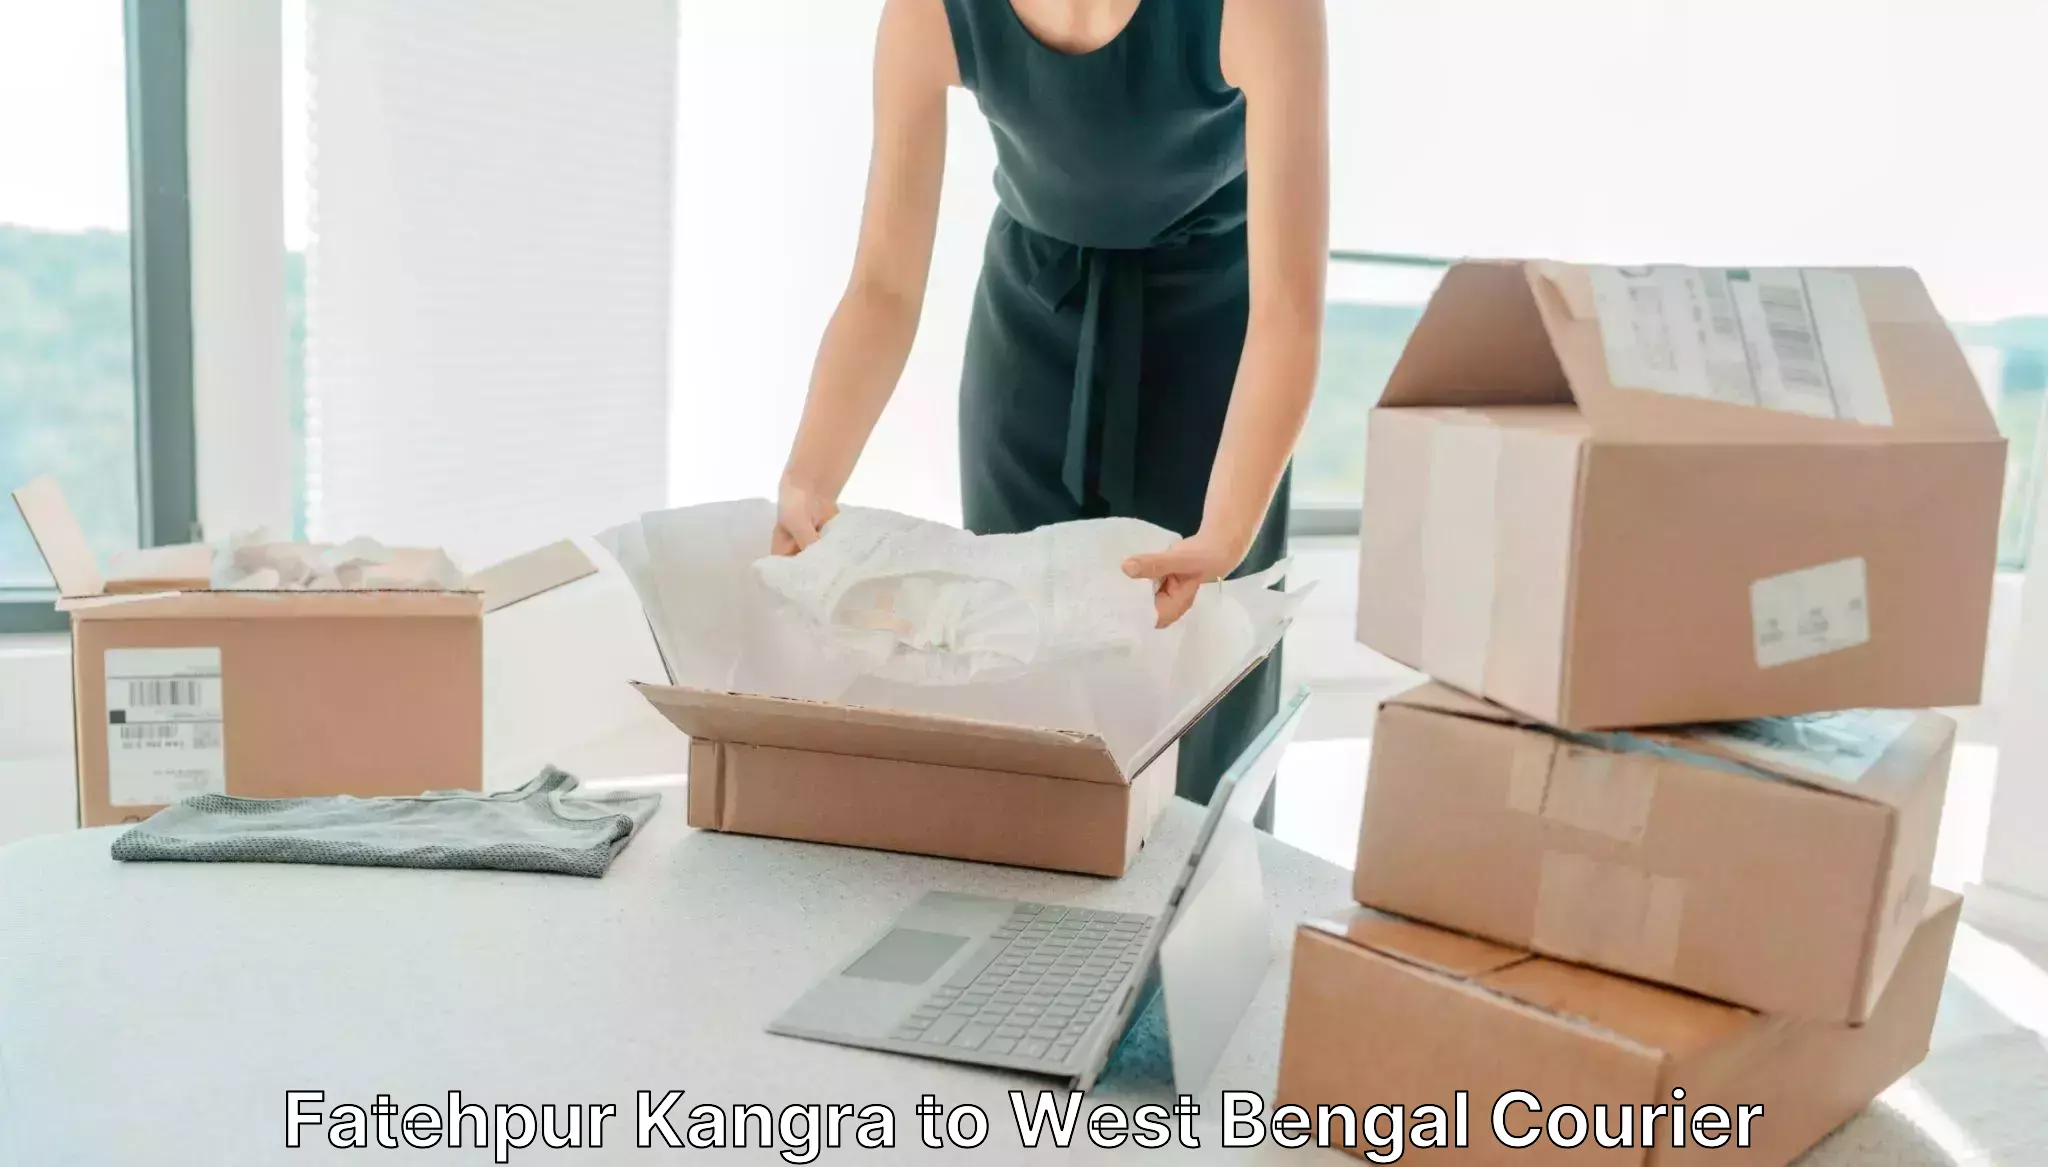 Courier service efficiency Fatehpur Kangra to West Bengal